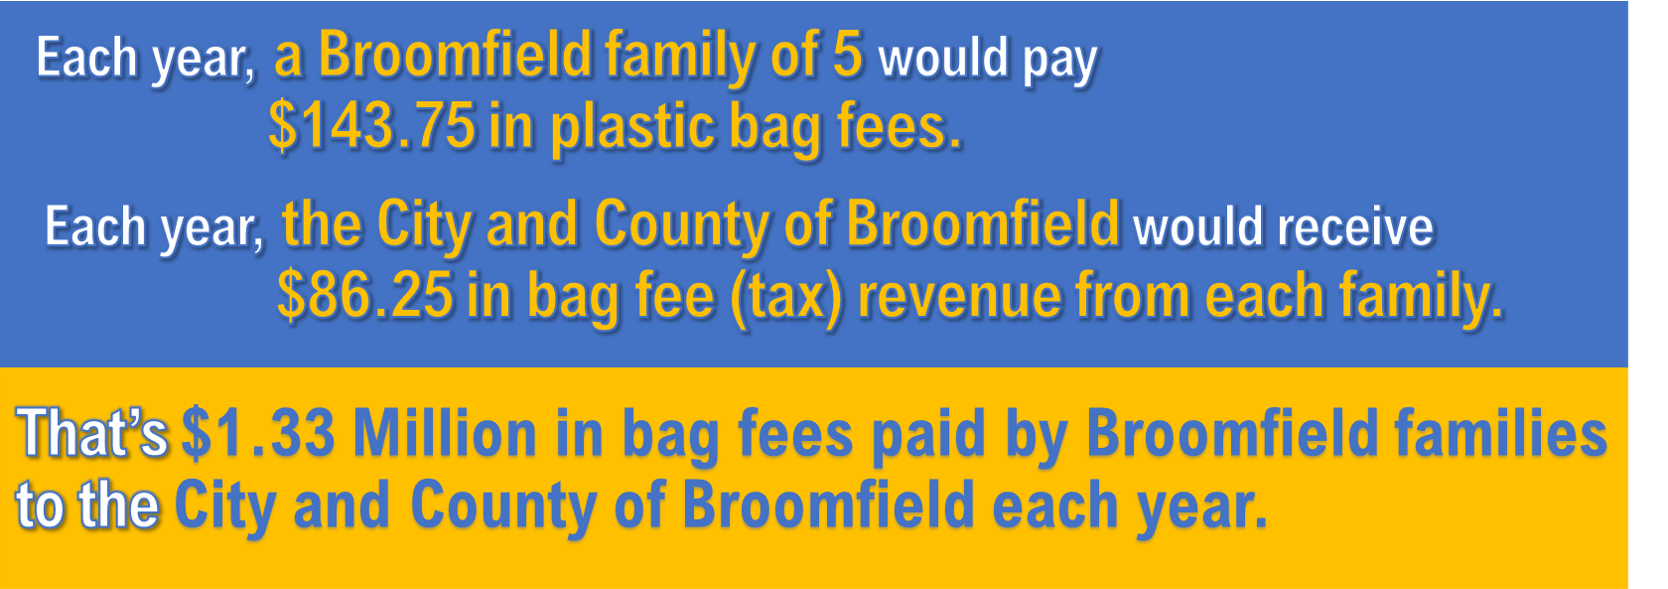 What's the Dealio with the Bag Fee — Broomfield Taxpayer Matters